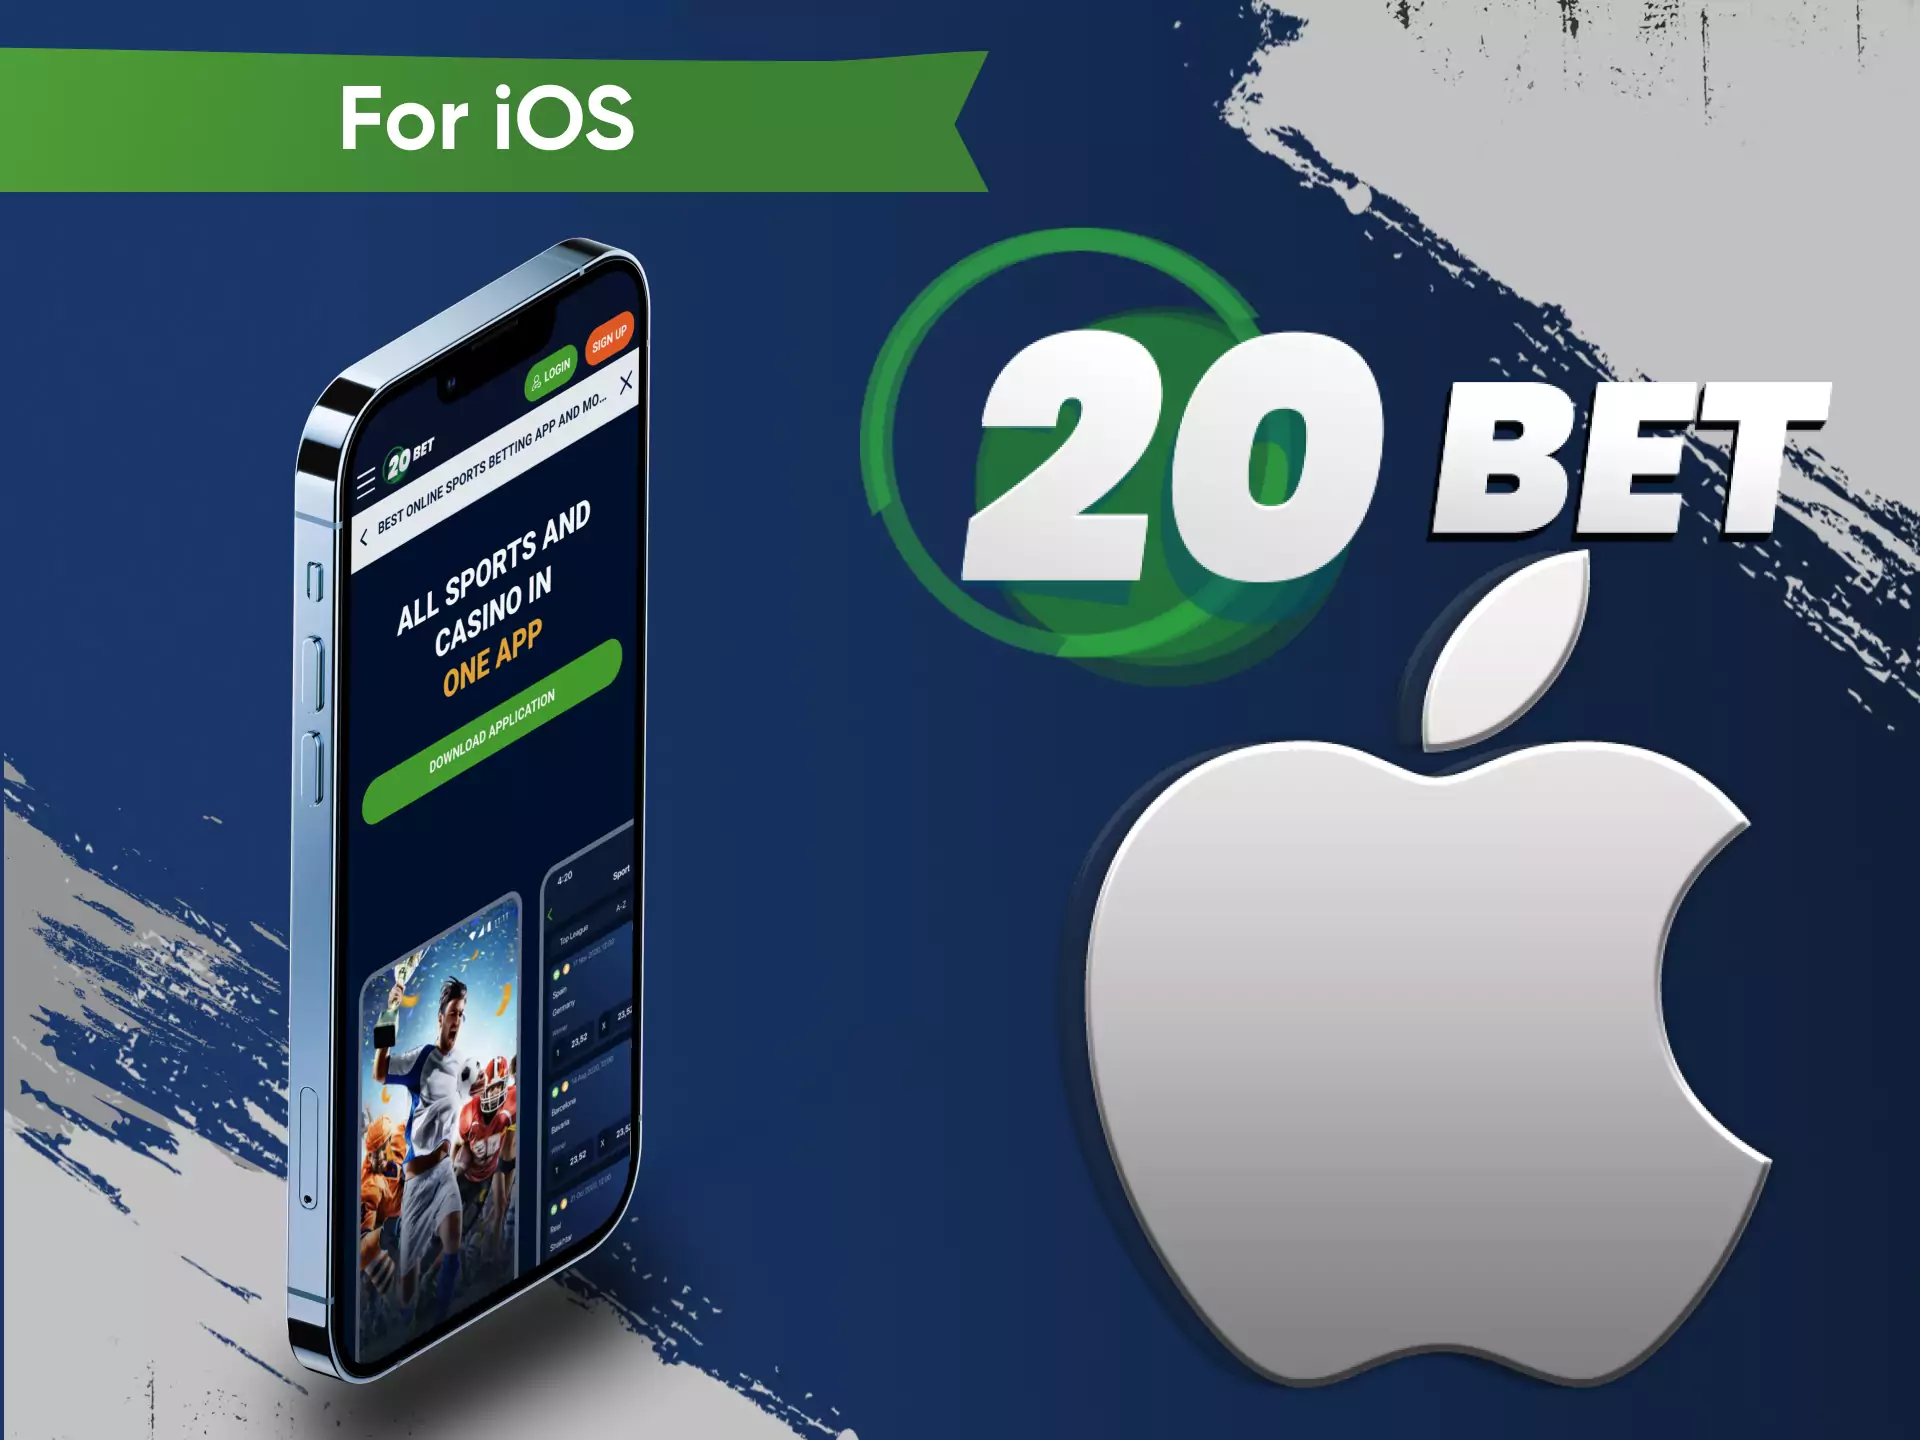 From iOS devices, use the mobile website of 20bet.